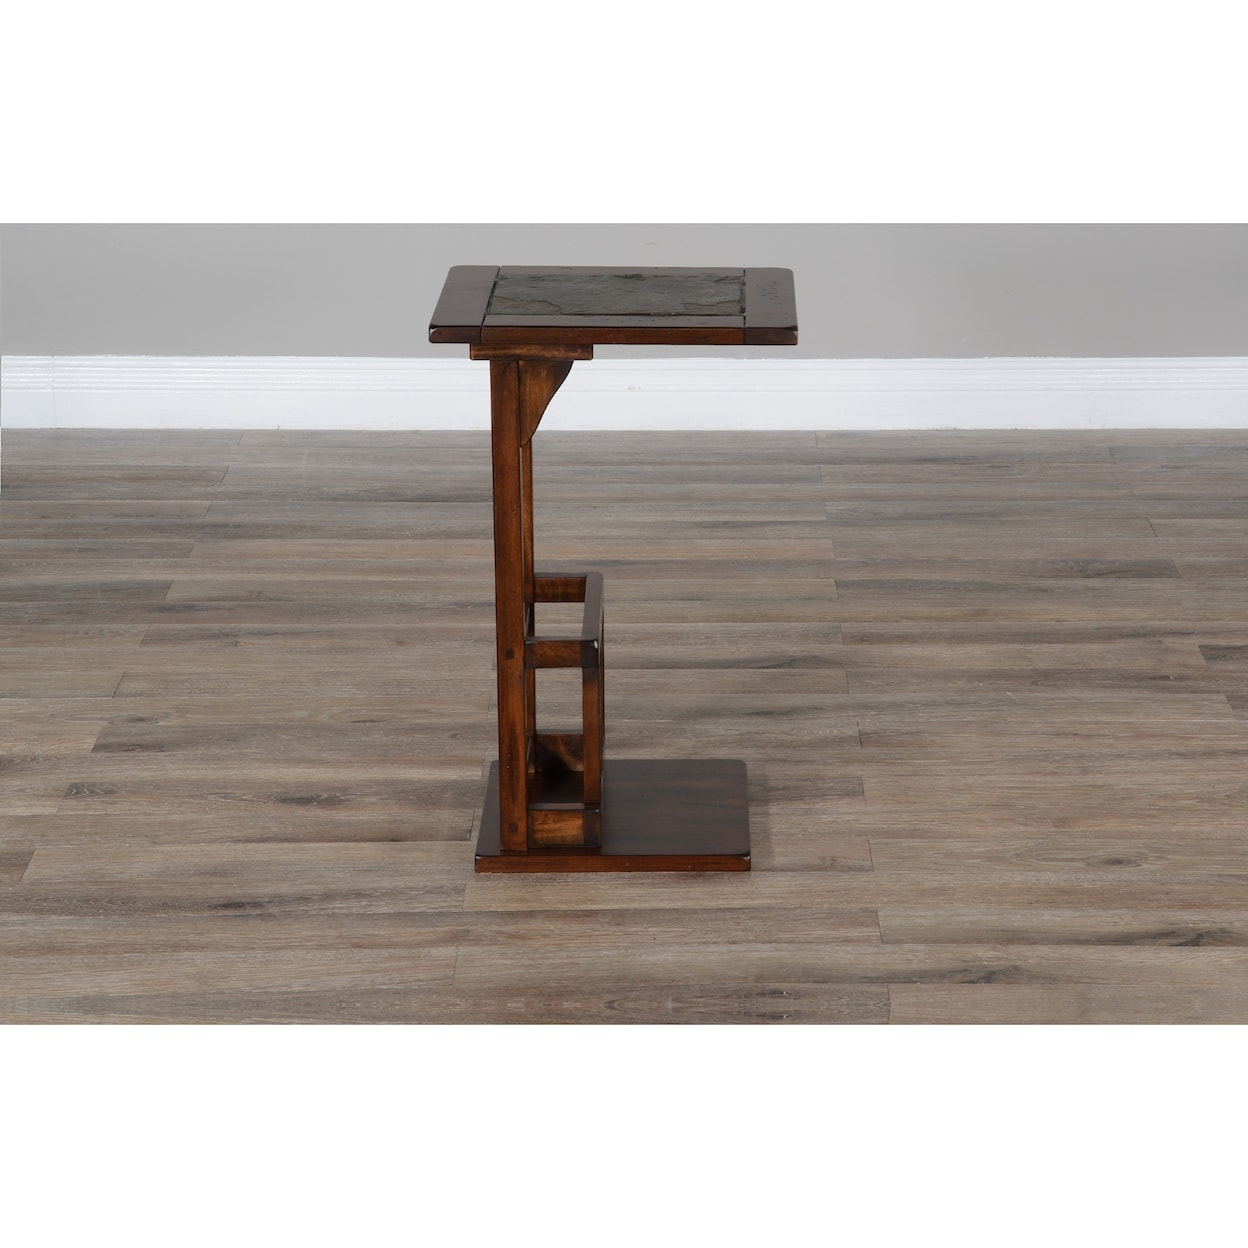 Sunny Designs Columbia AUGUSTA BROWN CHAIRSIDE TABLE | WITH STORAGE